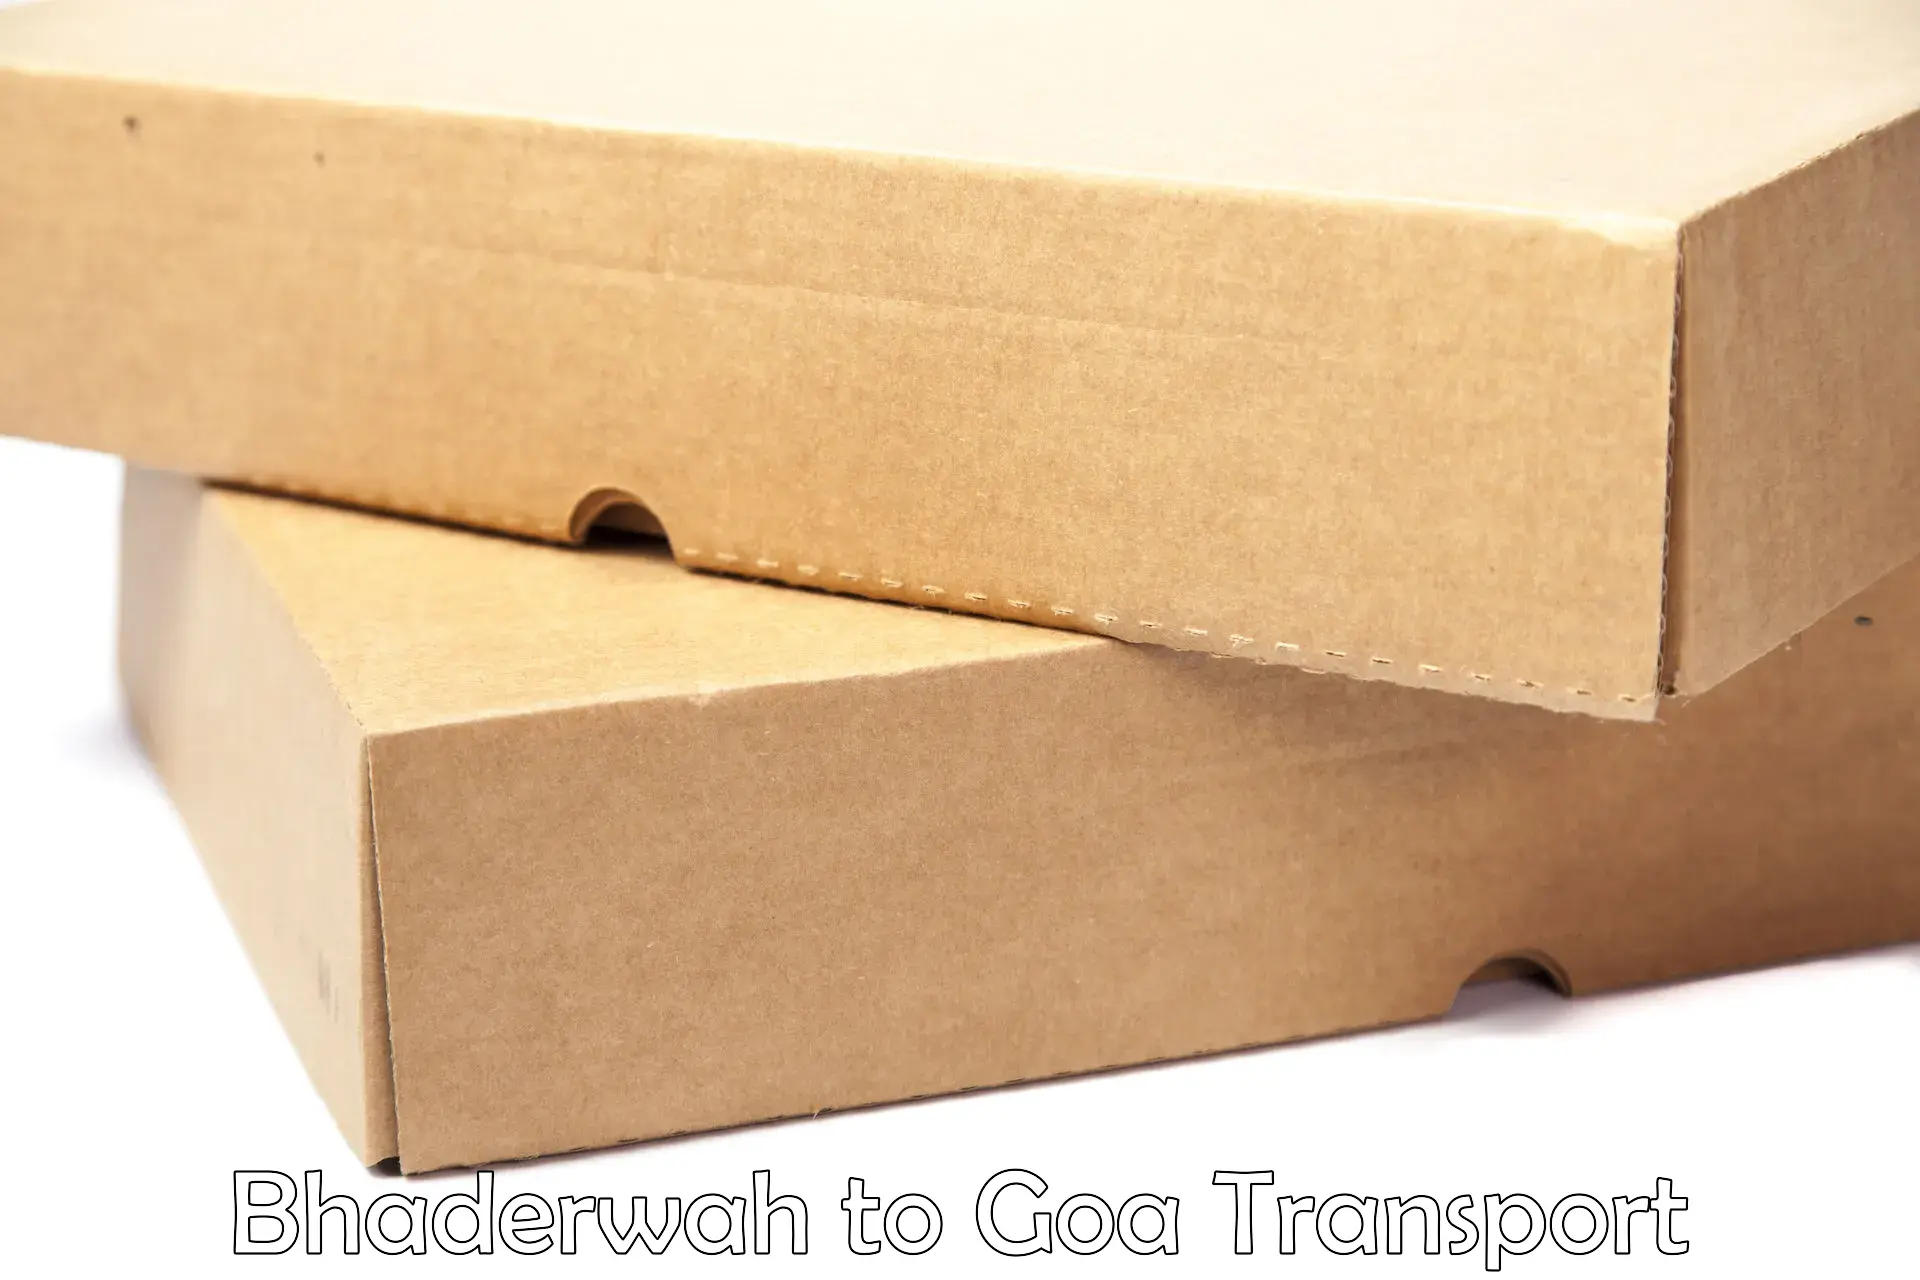 Air freight transport services Bhaderwah to Goa